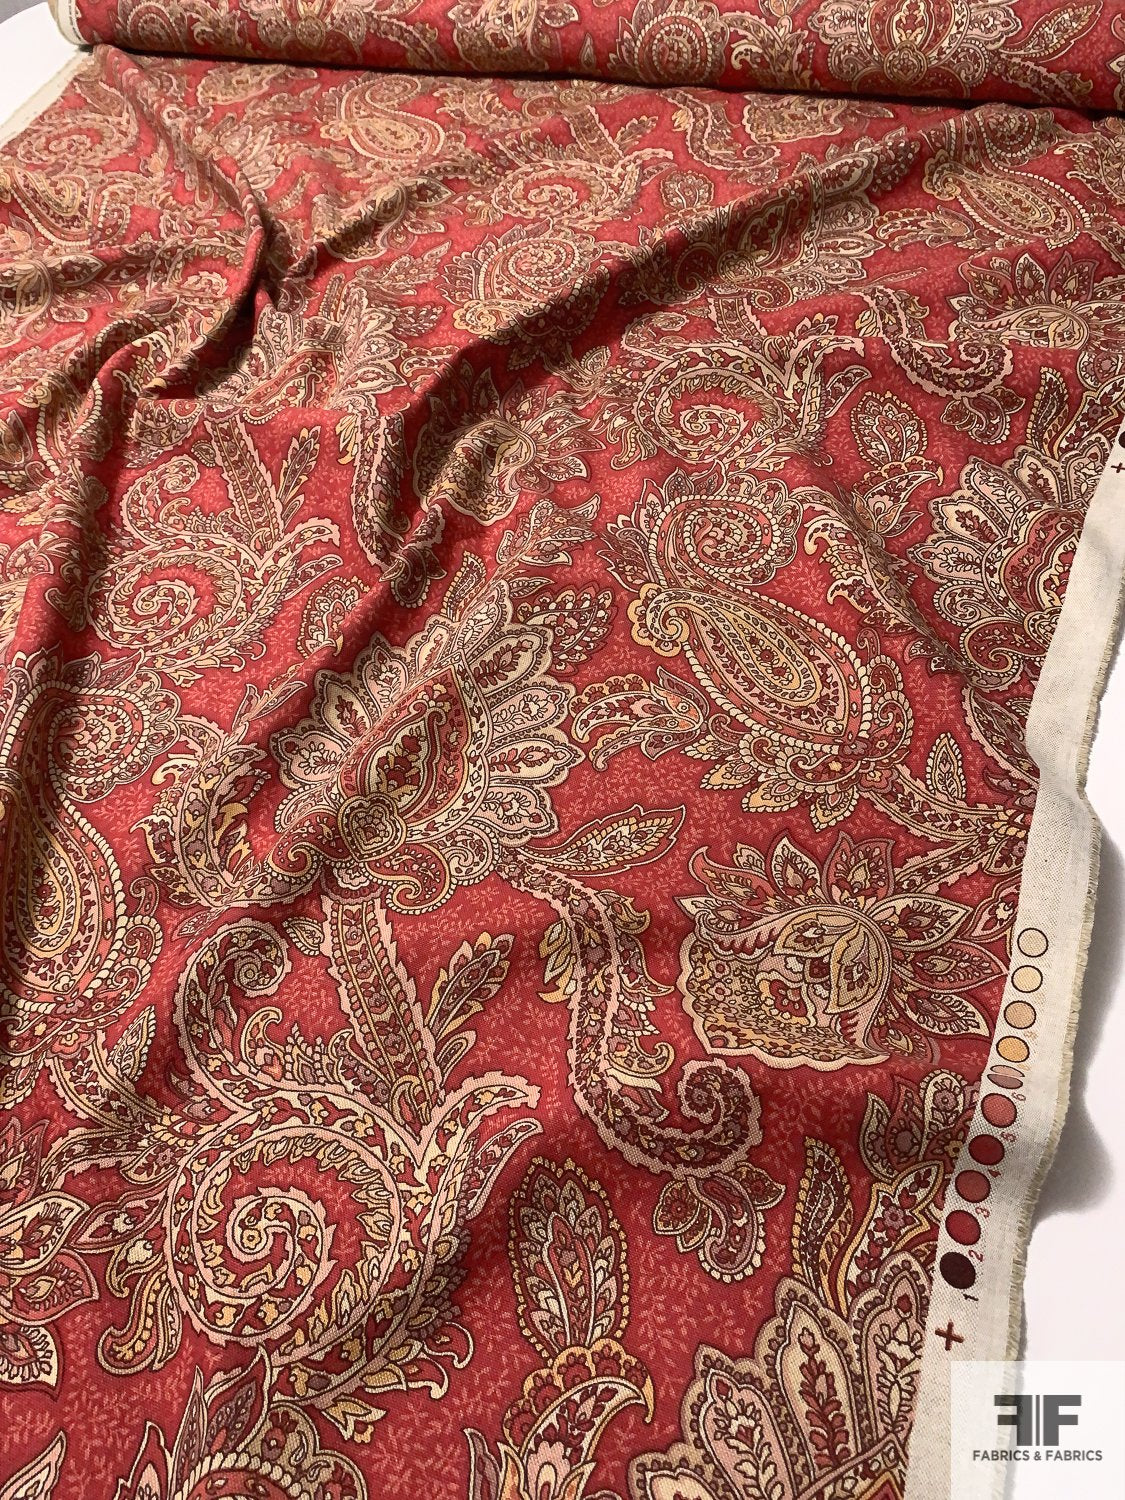 Ornate Paisley Printed Cotton-Linen - Cranberry / Tans / Yellow